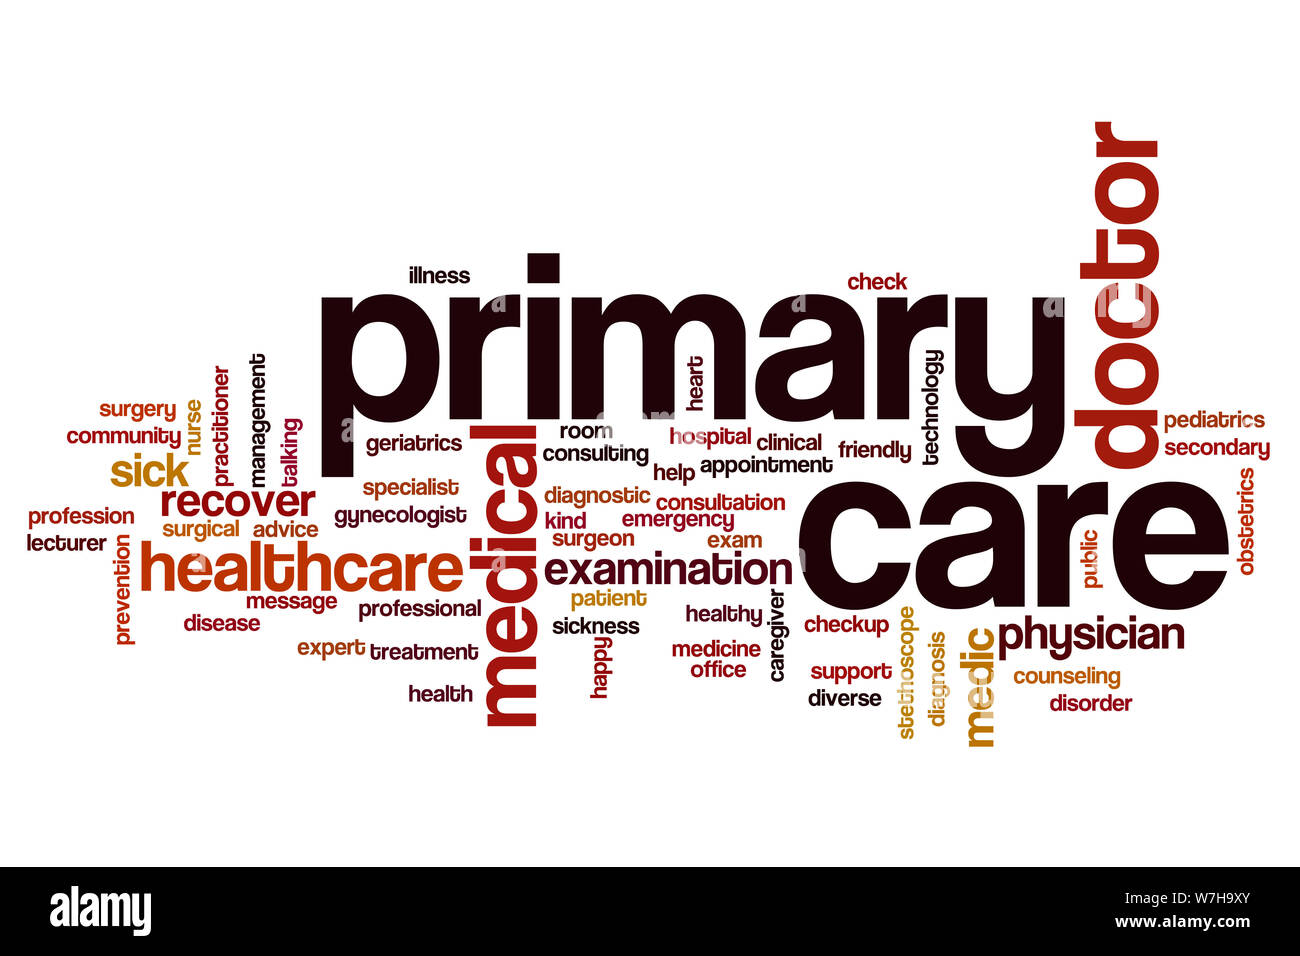 Primary care word cloud concept Stock Photo